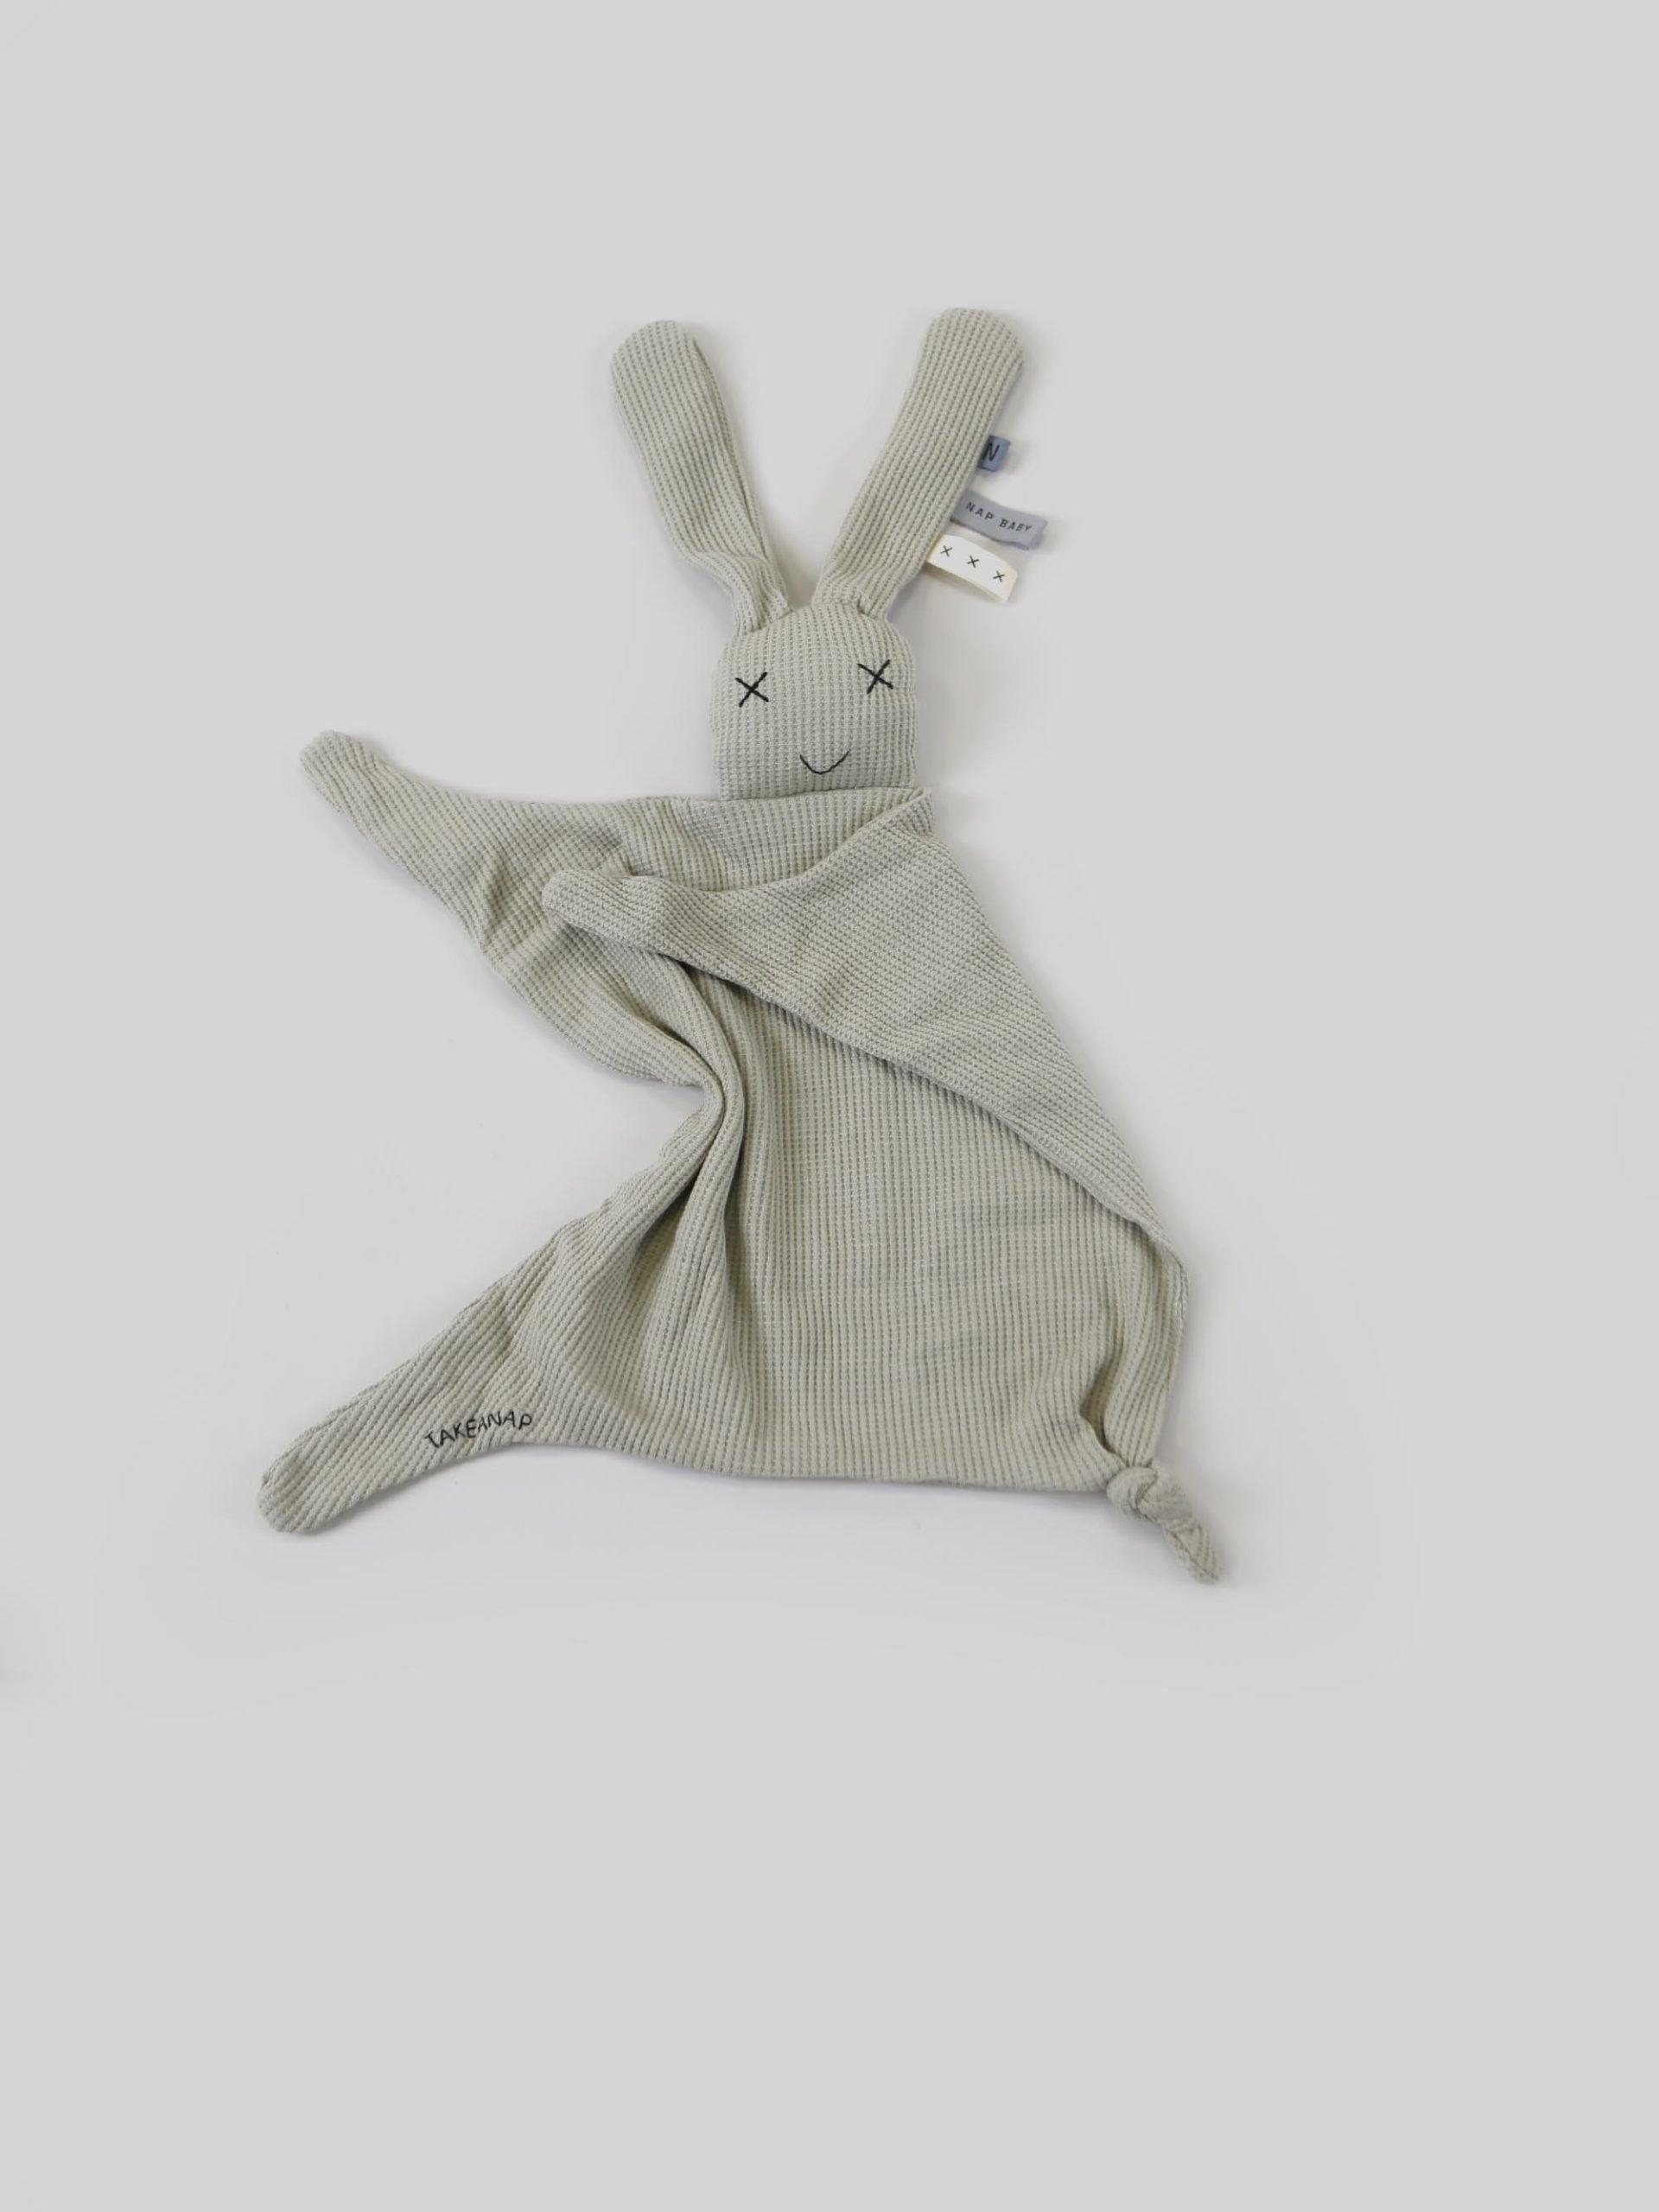 Jacquard Collection | My Bunny